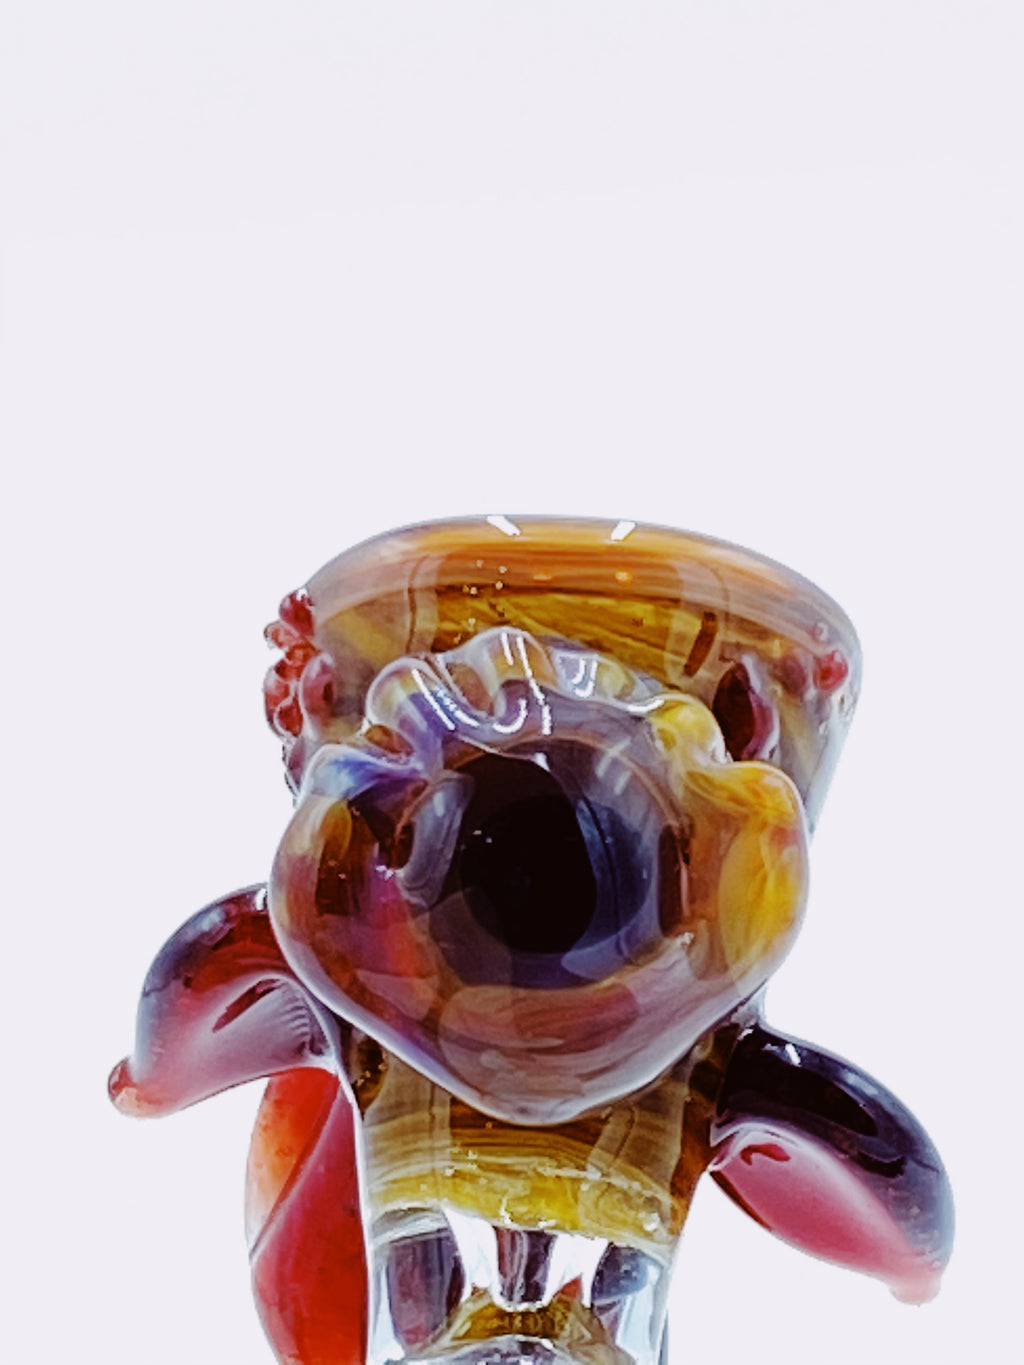 Tear E 14mm Monster Bowl Type 5 - Smoke Country - Land of the artistic glass blown bongs